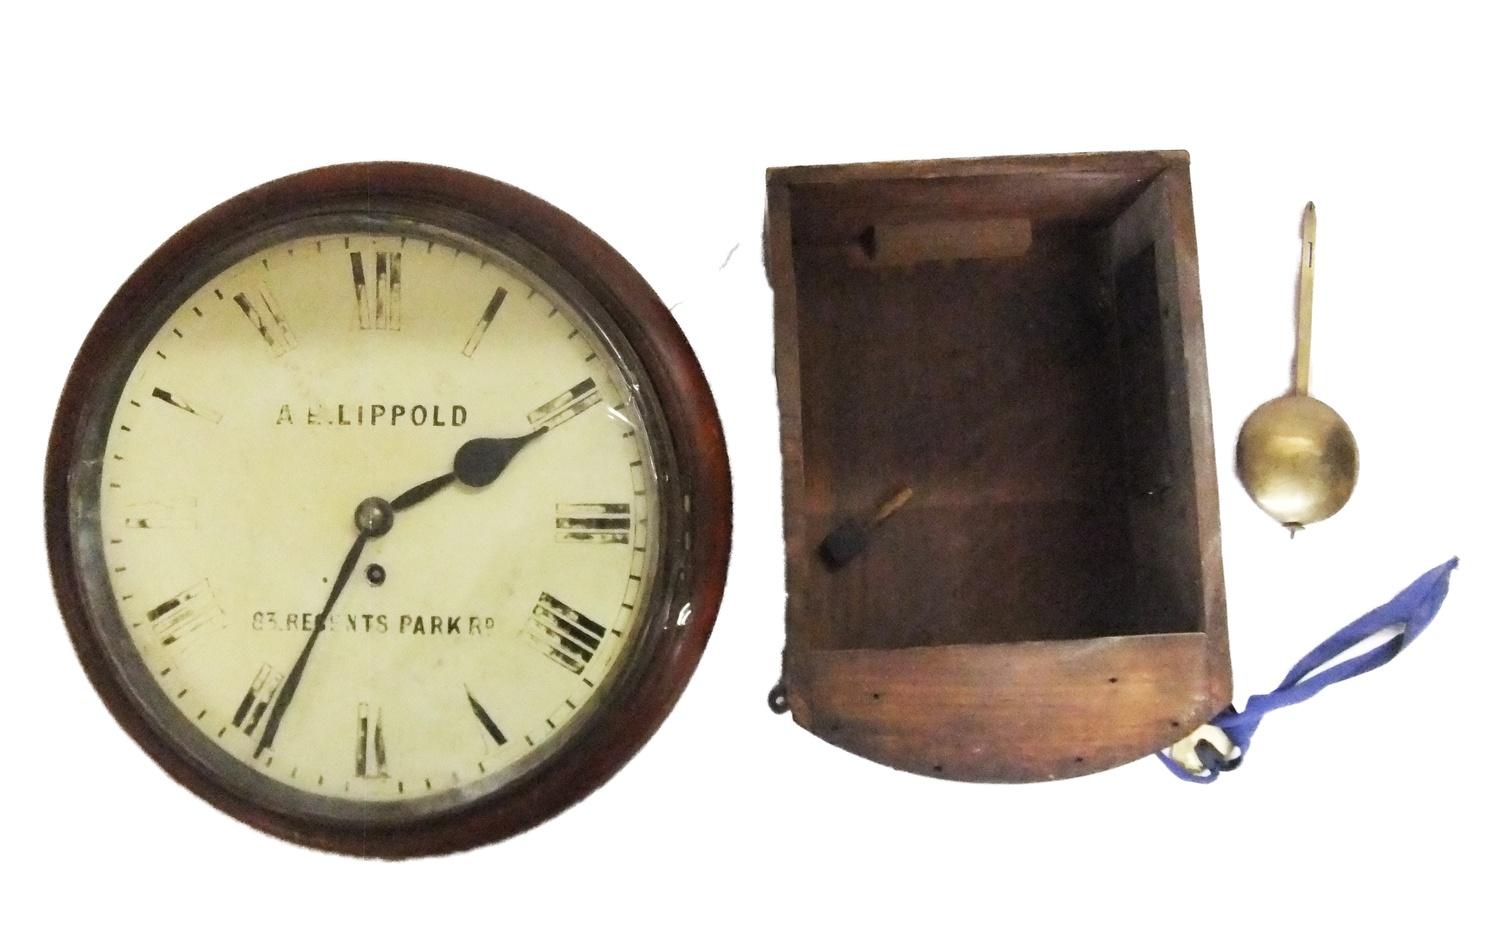 C19th Mahogany Cased Fusee Dial Clock marked AE Lippold 83 Regents Park Road, Roman numerals, - Image 3 of 6